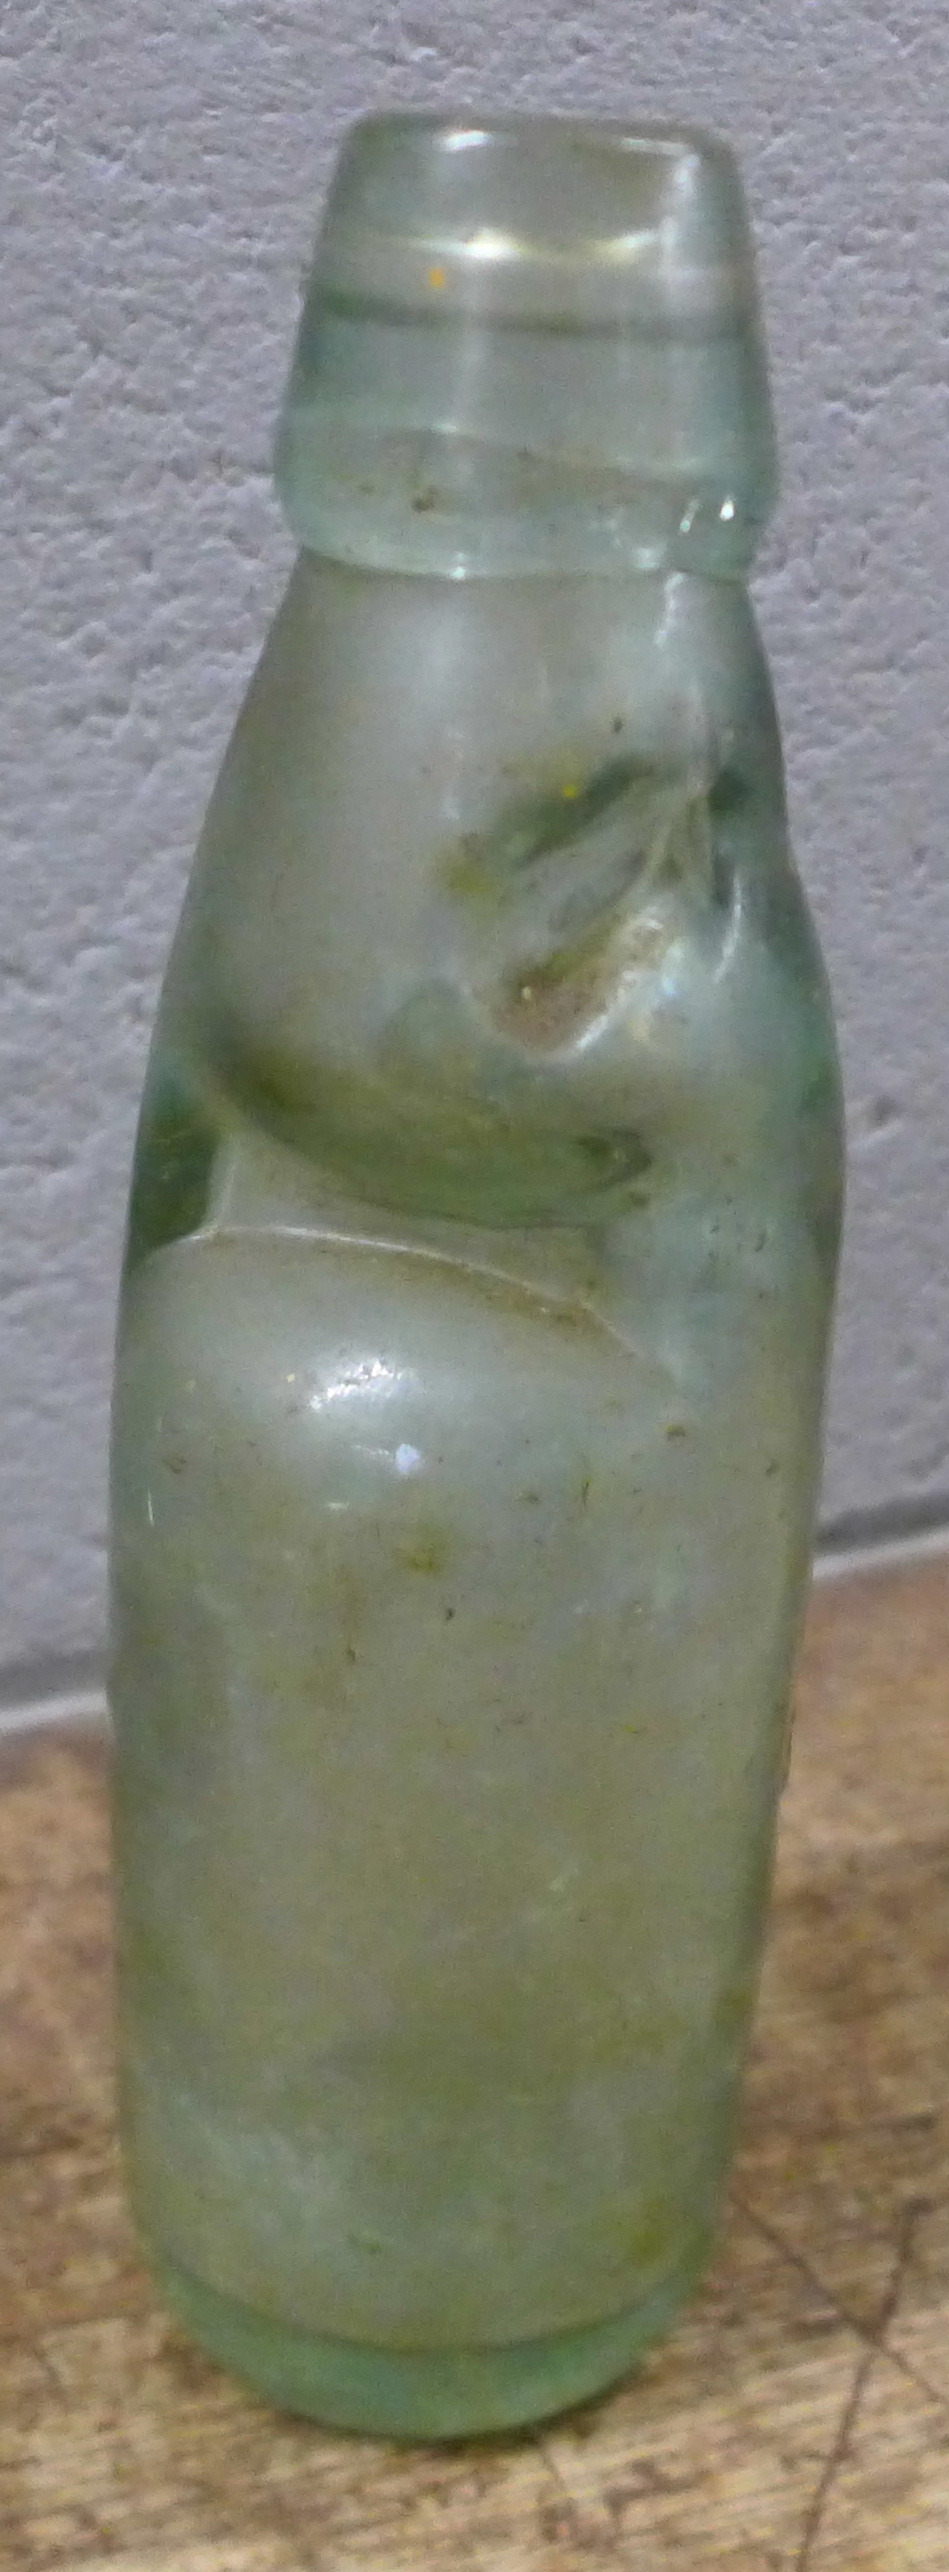 A glass cod bottle, J.J. Mettham, Mansfield and a hot water bottle - Image 3 of 3